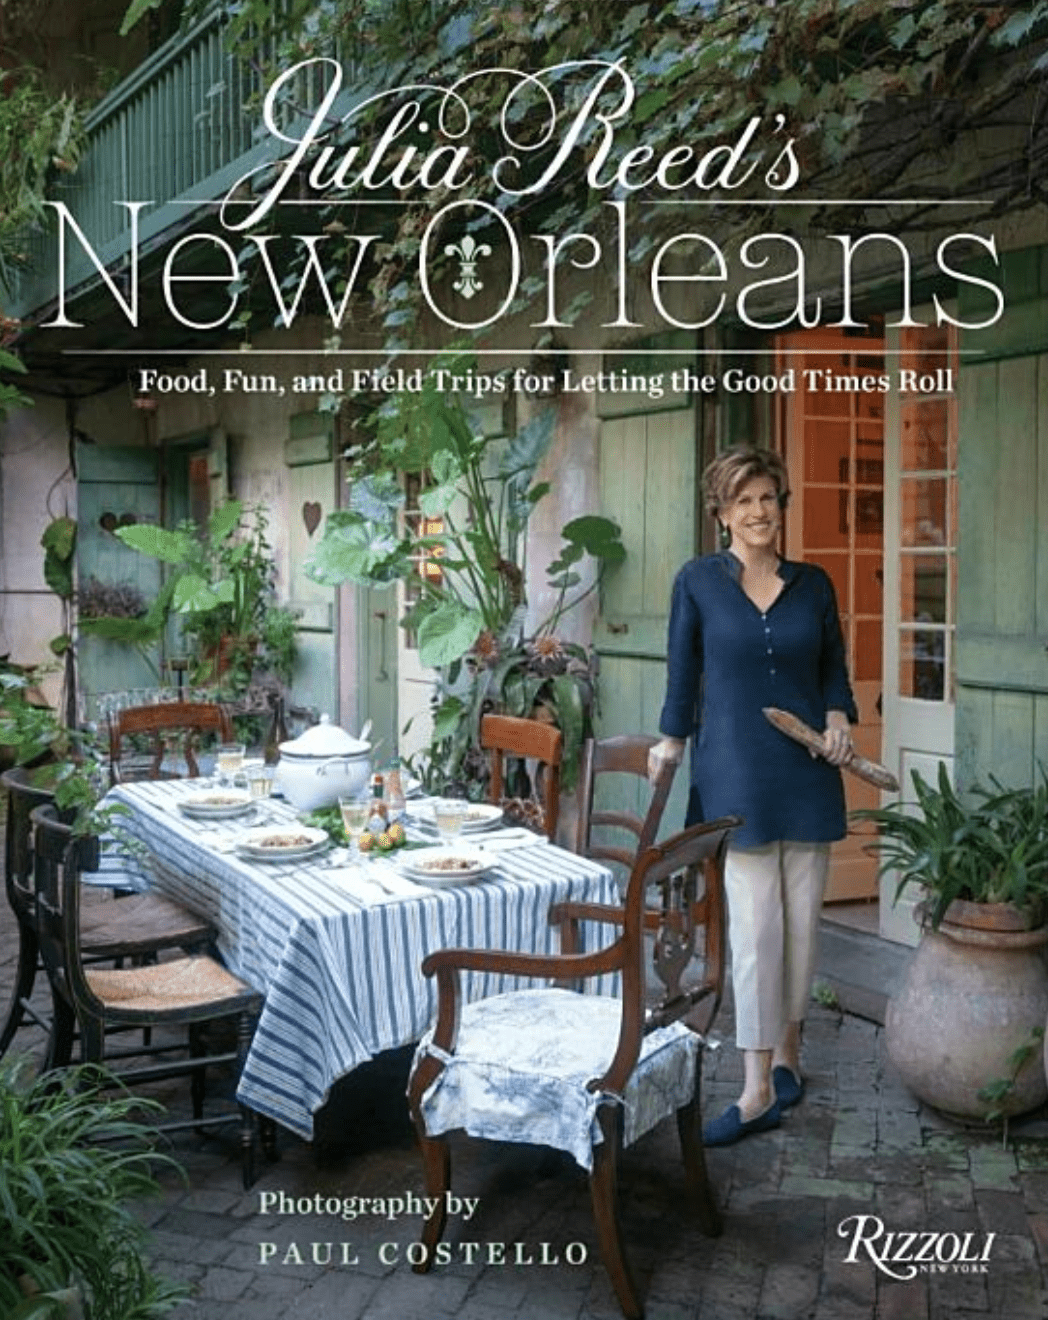 Julia Reed's New Orleans book